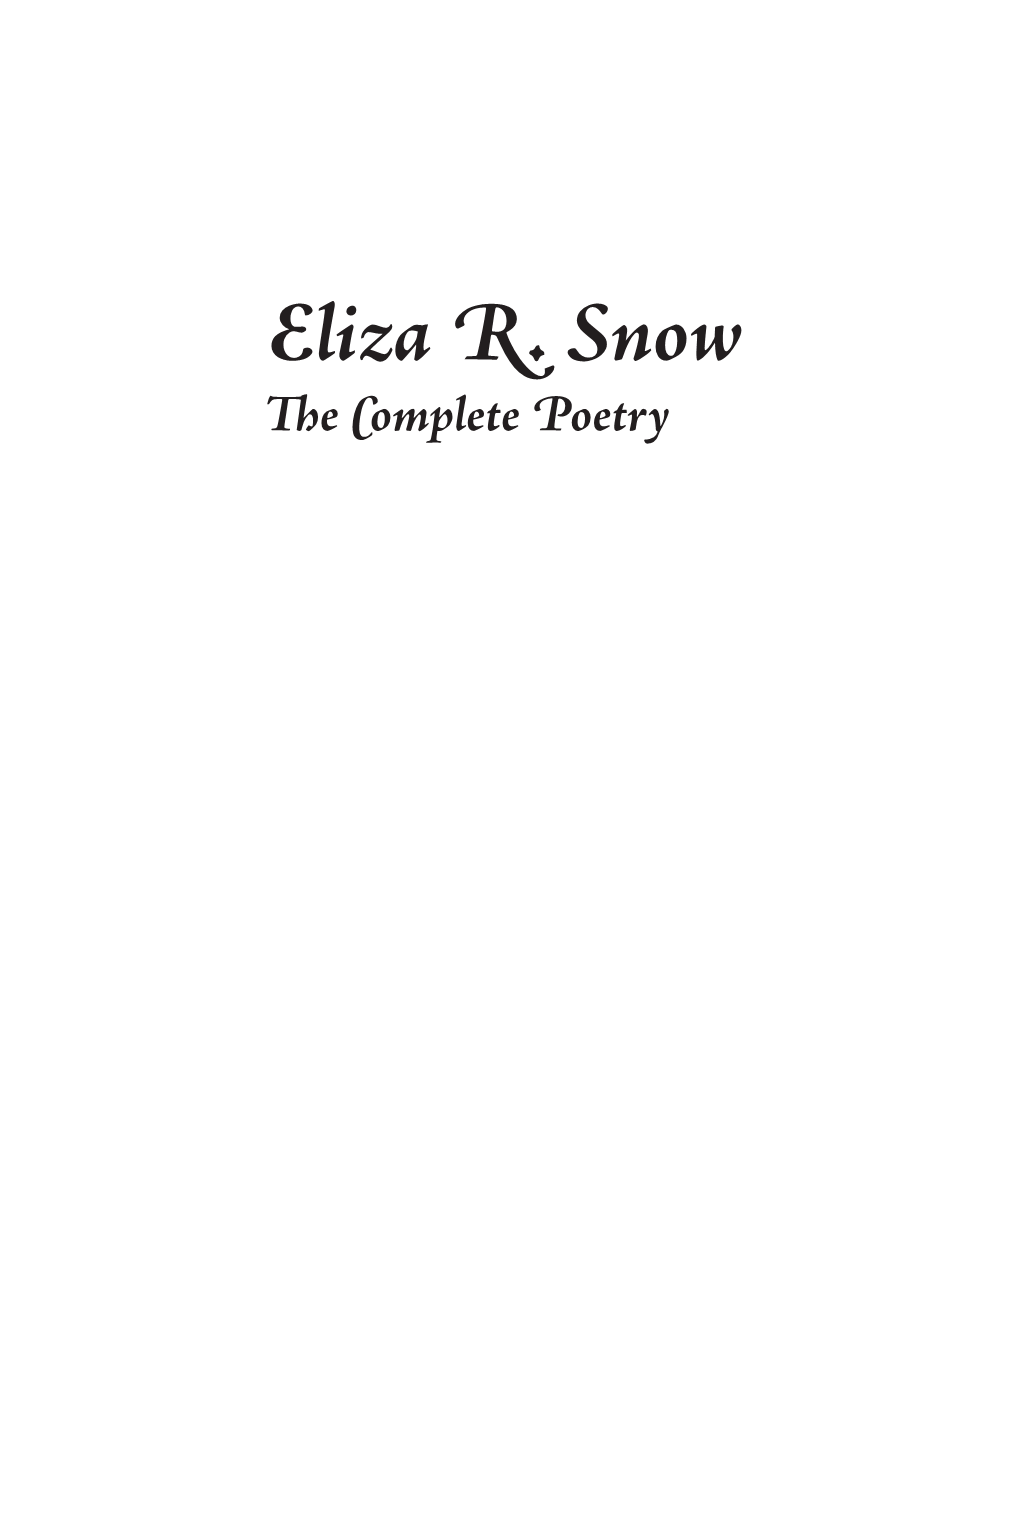 Eliza R. Snow the Complete Poetry Documents in Latter-Day Saint History an Imprint of BYU Studies and Brigham Young University Provo, Utah Eliza R